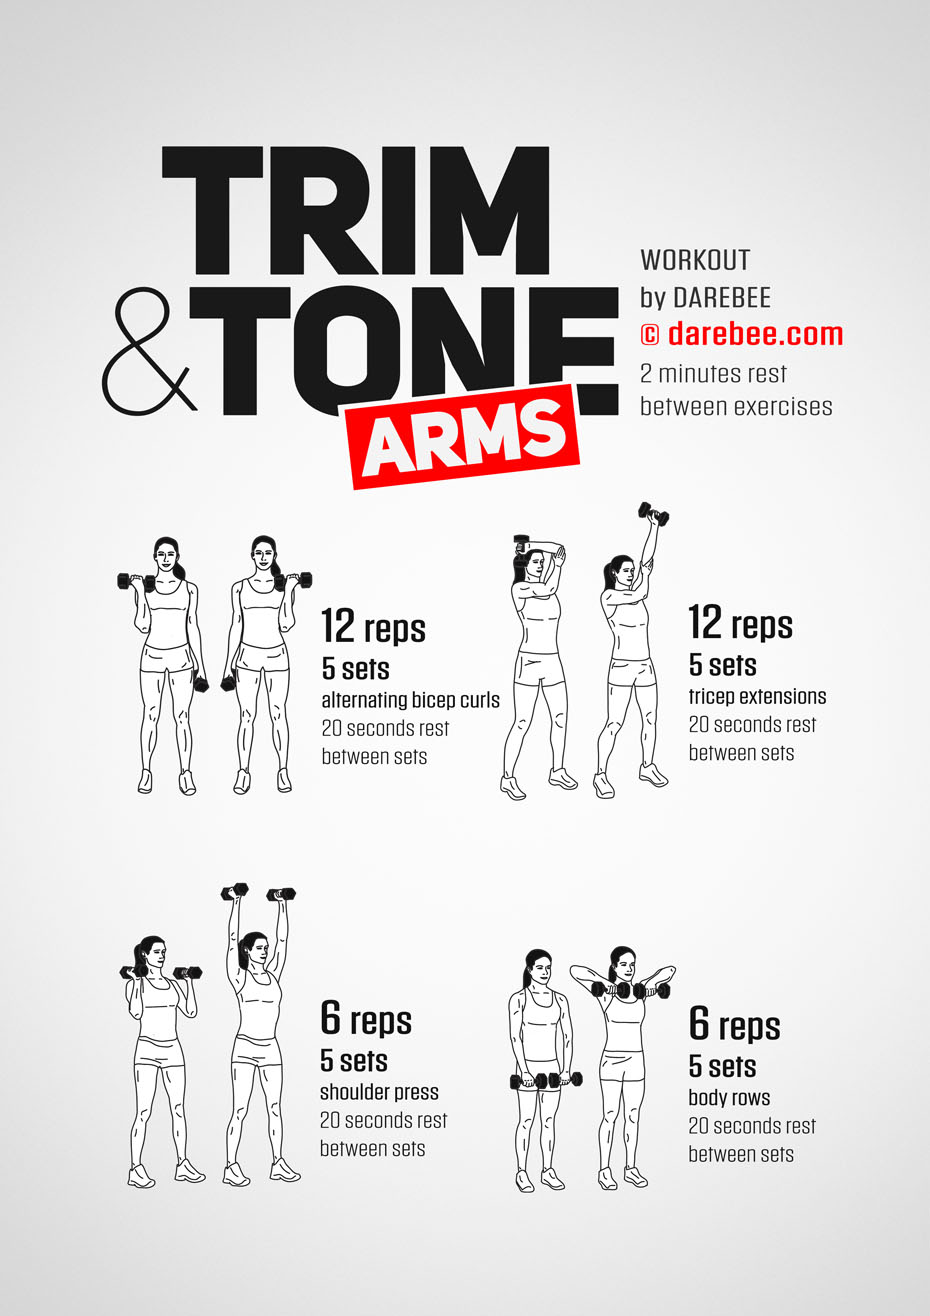 Tone your arms  Fitness body, Arm workout, Exercise